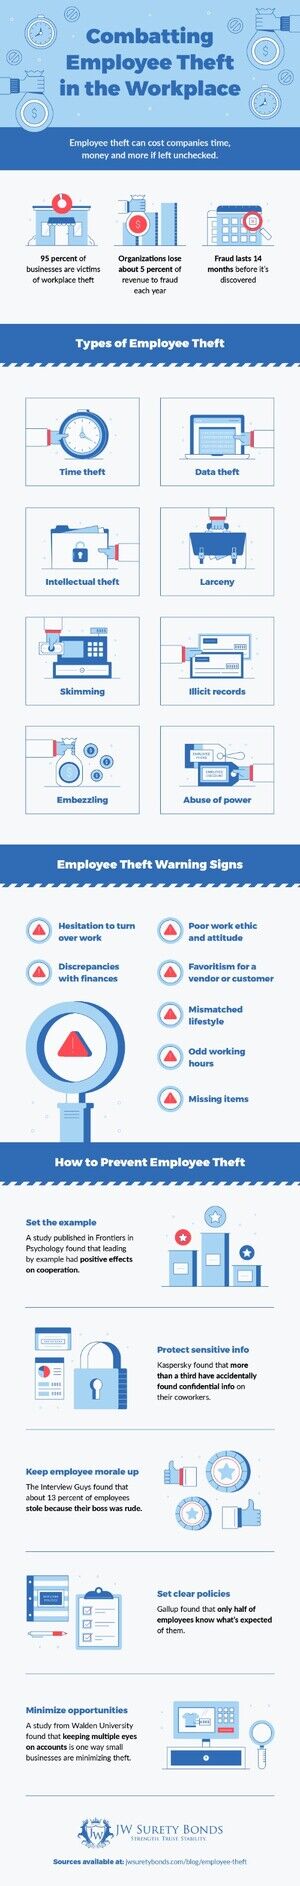 How to Spot Employee Theft While Working Remote